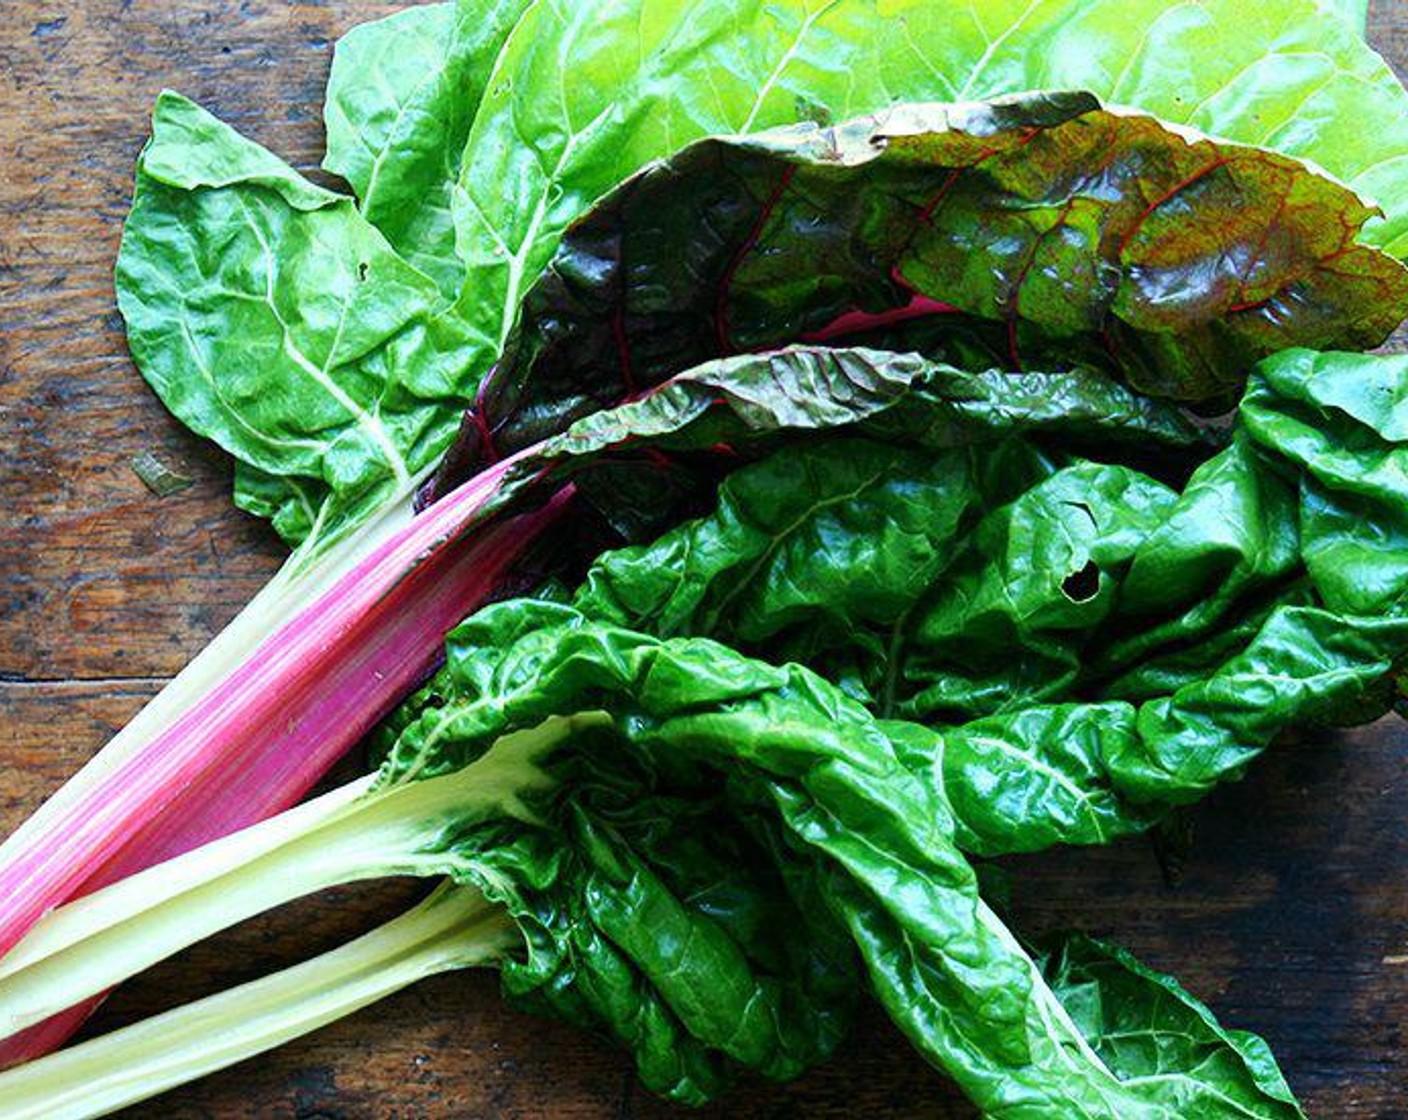 step 1 Wash and dry the Chard (1 bunch). Remove the stems from the leaves. Stack a few of the leaves on top of each other, roll them like a cigar and cut the cigar into thin, 1/8-inch ribbons. Repeat until all the leaves are shredded. Put the leaves into a large salad bowl.